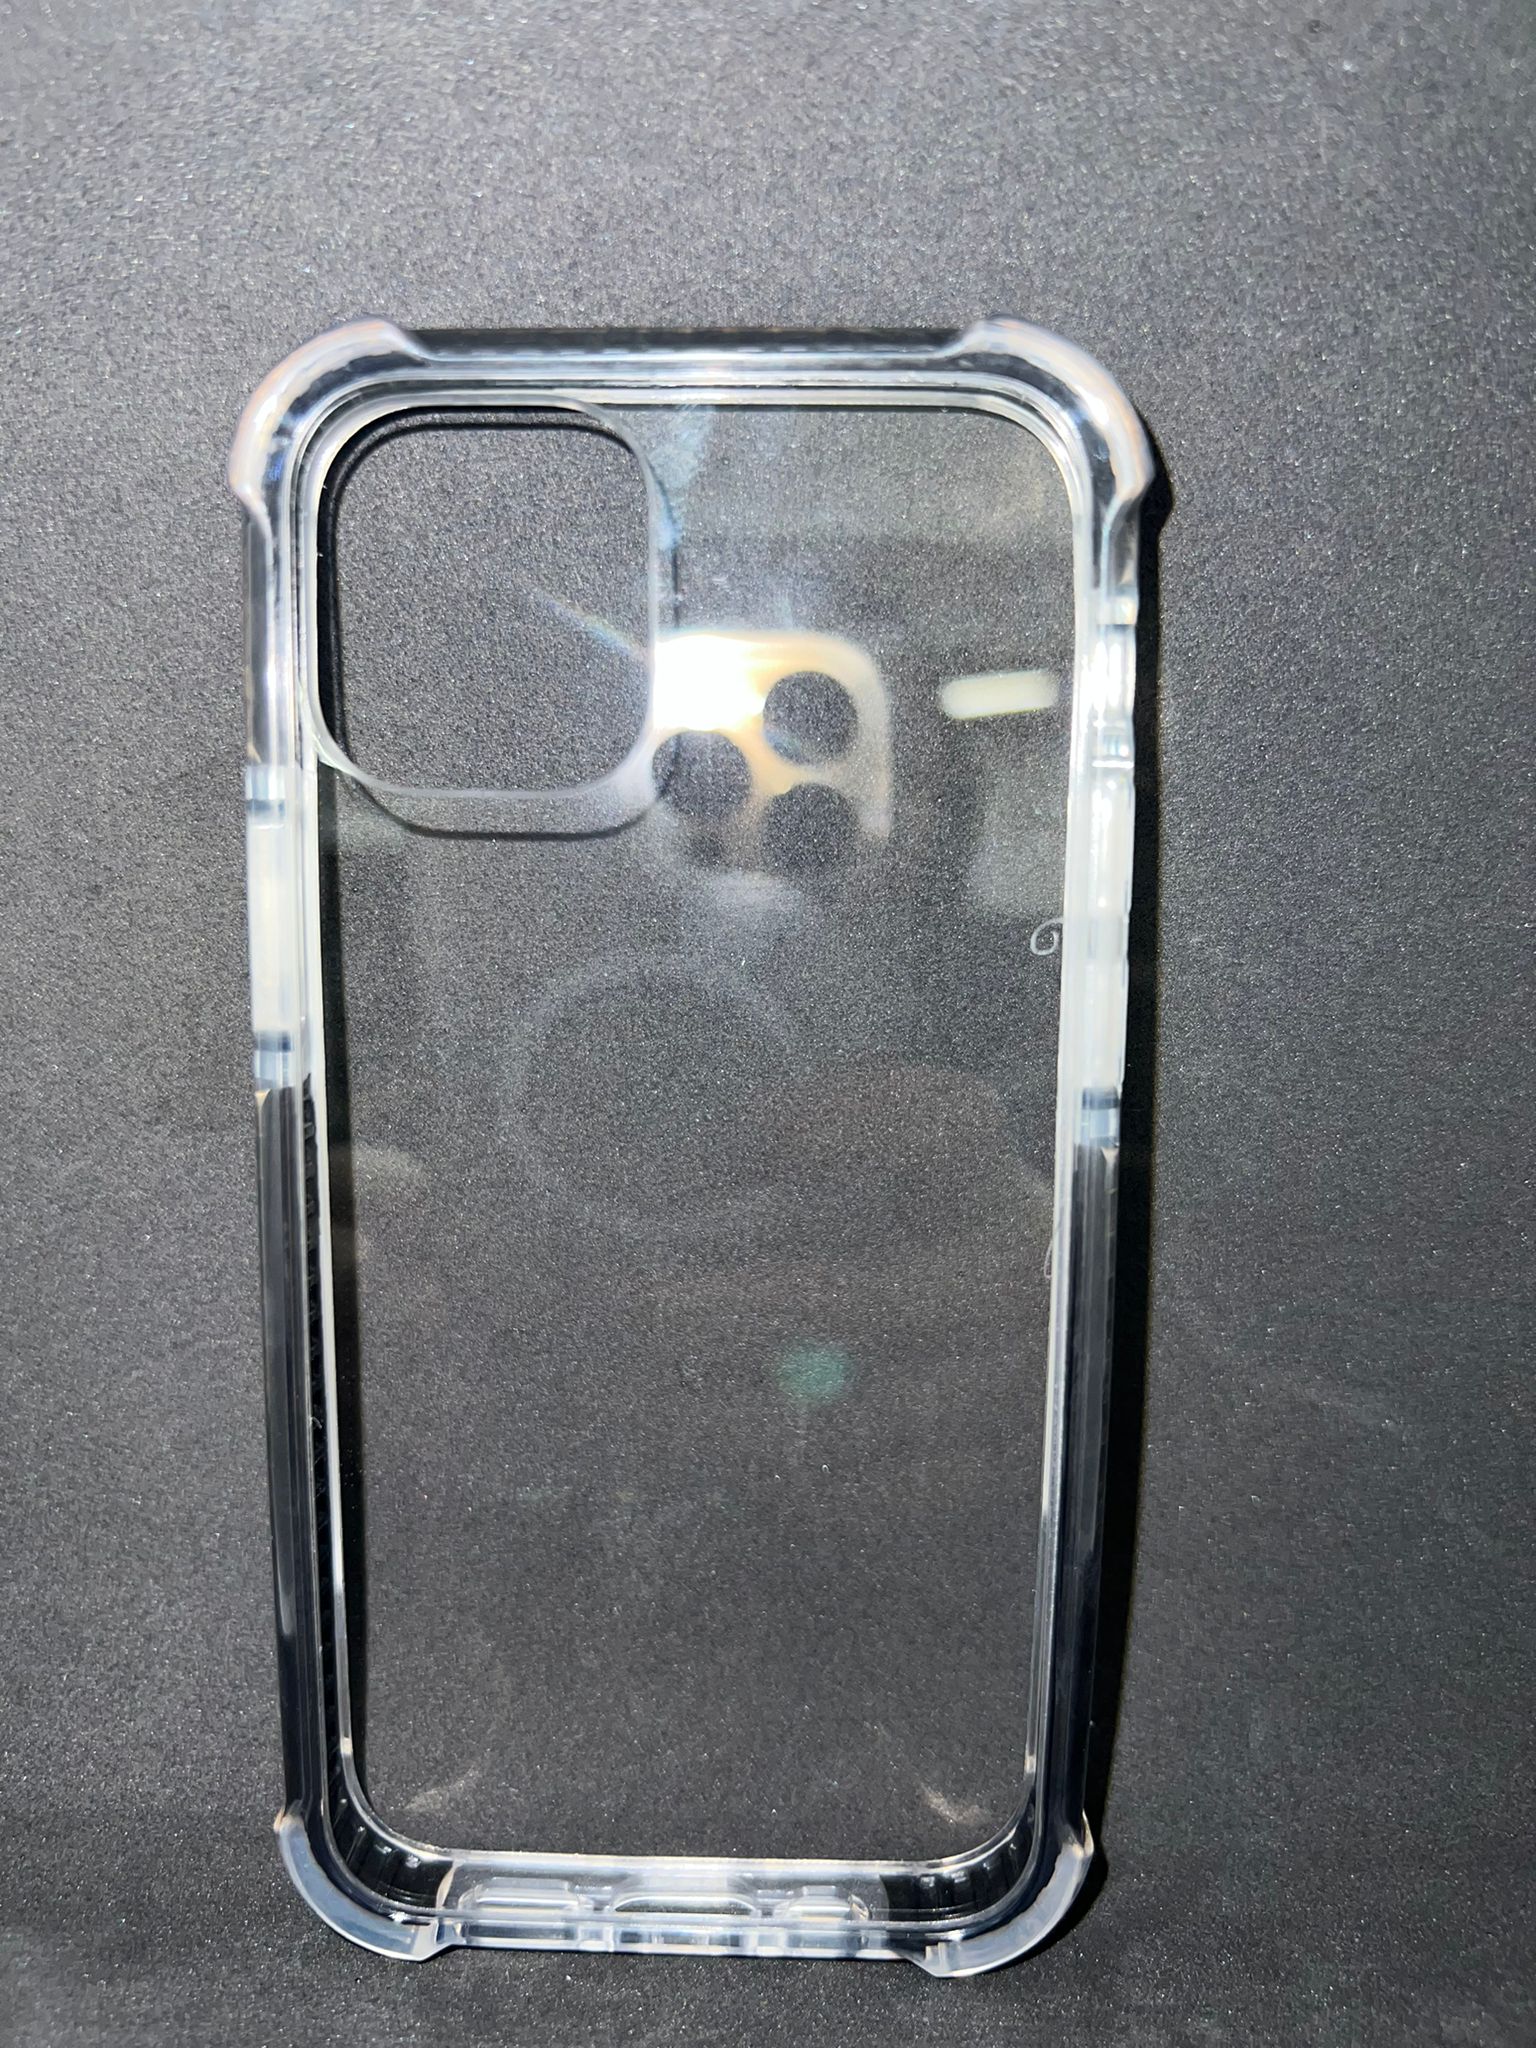 iPhone 11 Clear Case